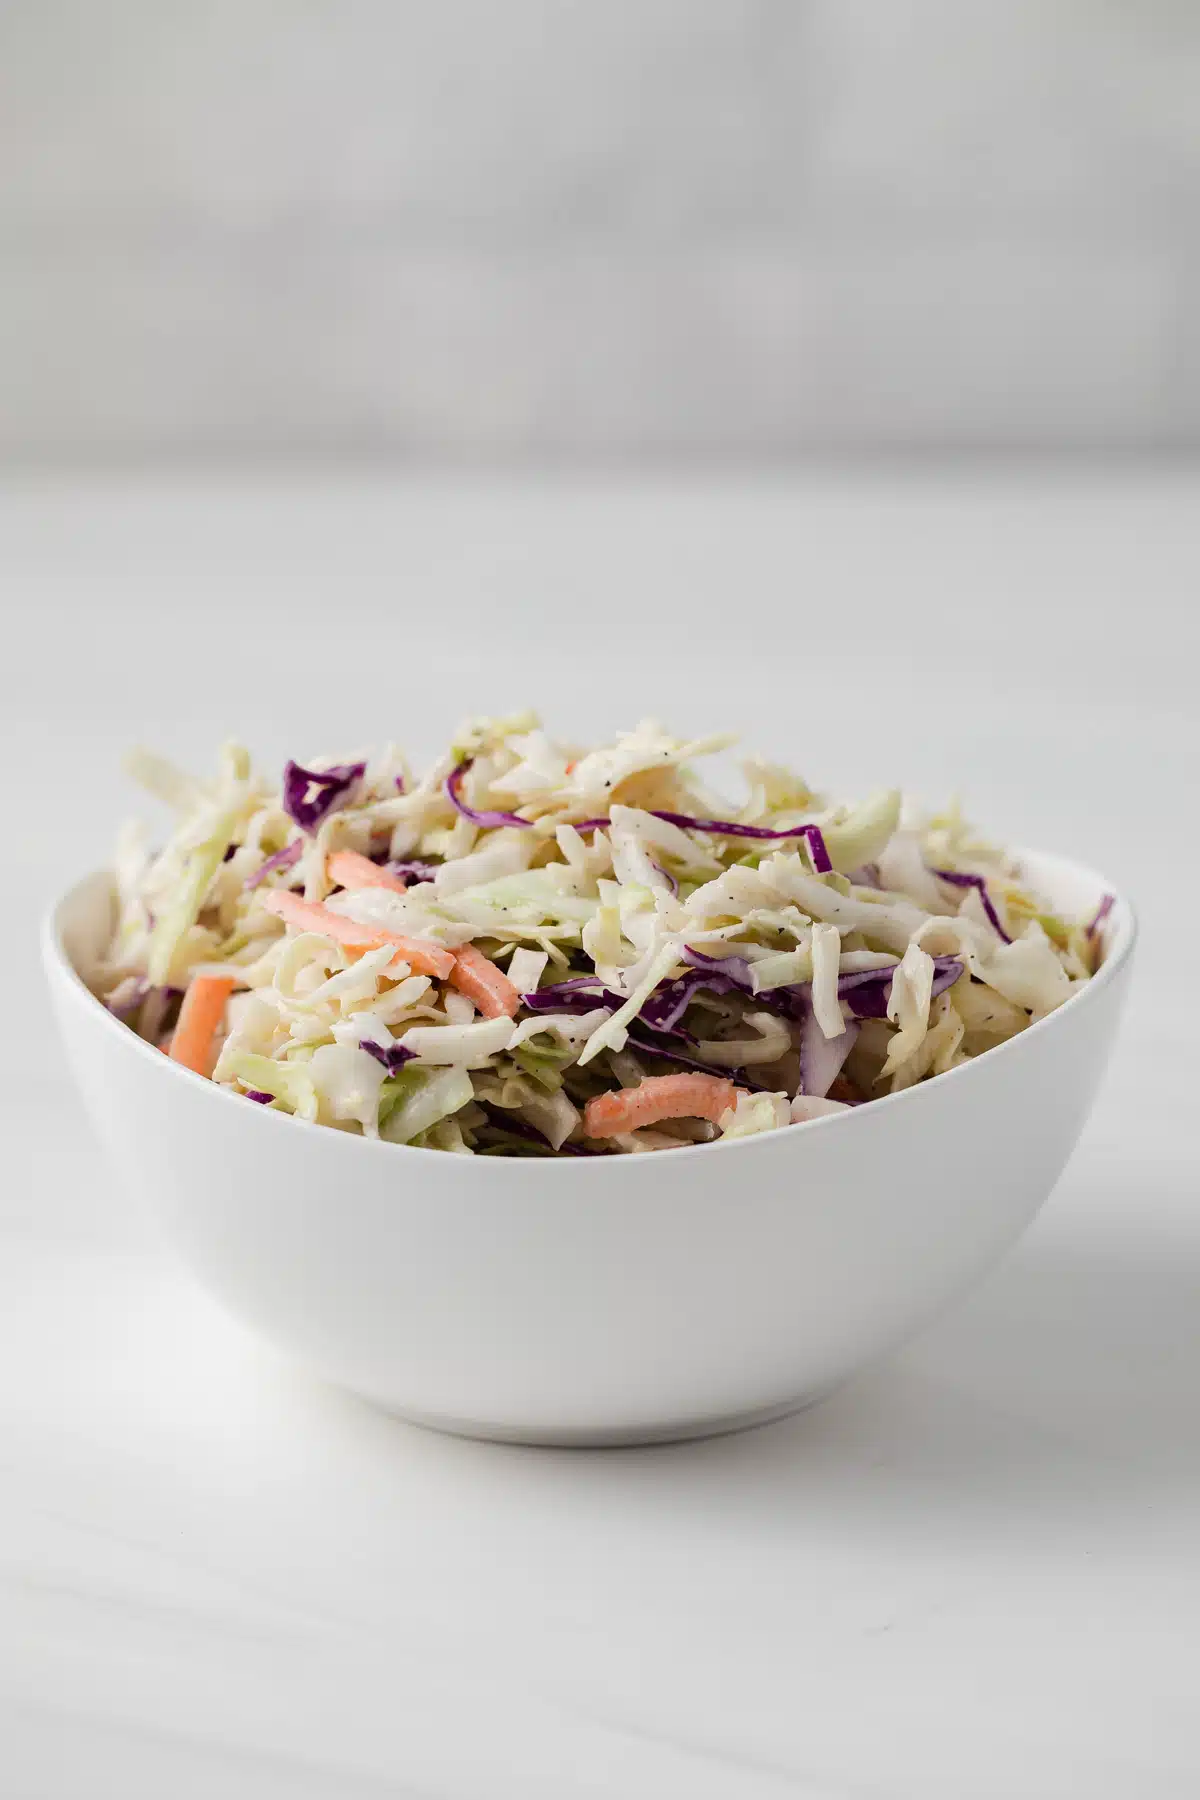 Side view of slaw coated in coleslaw dressing.